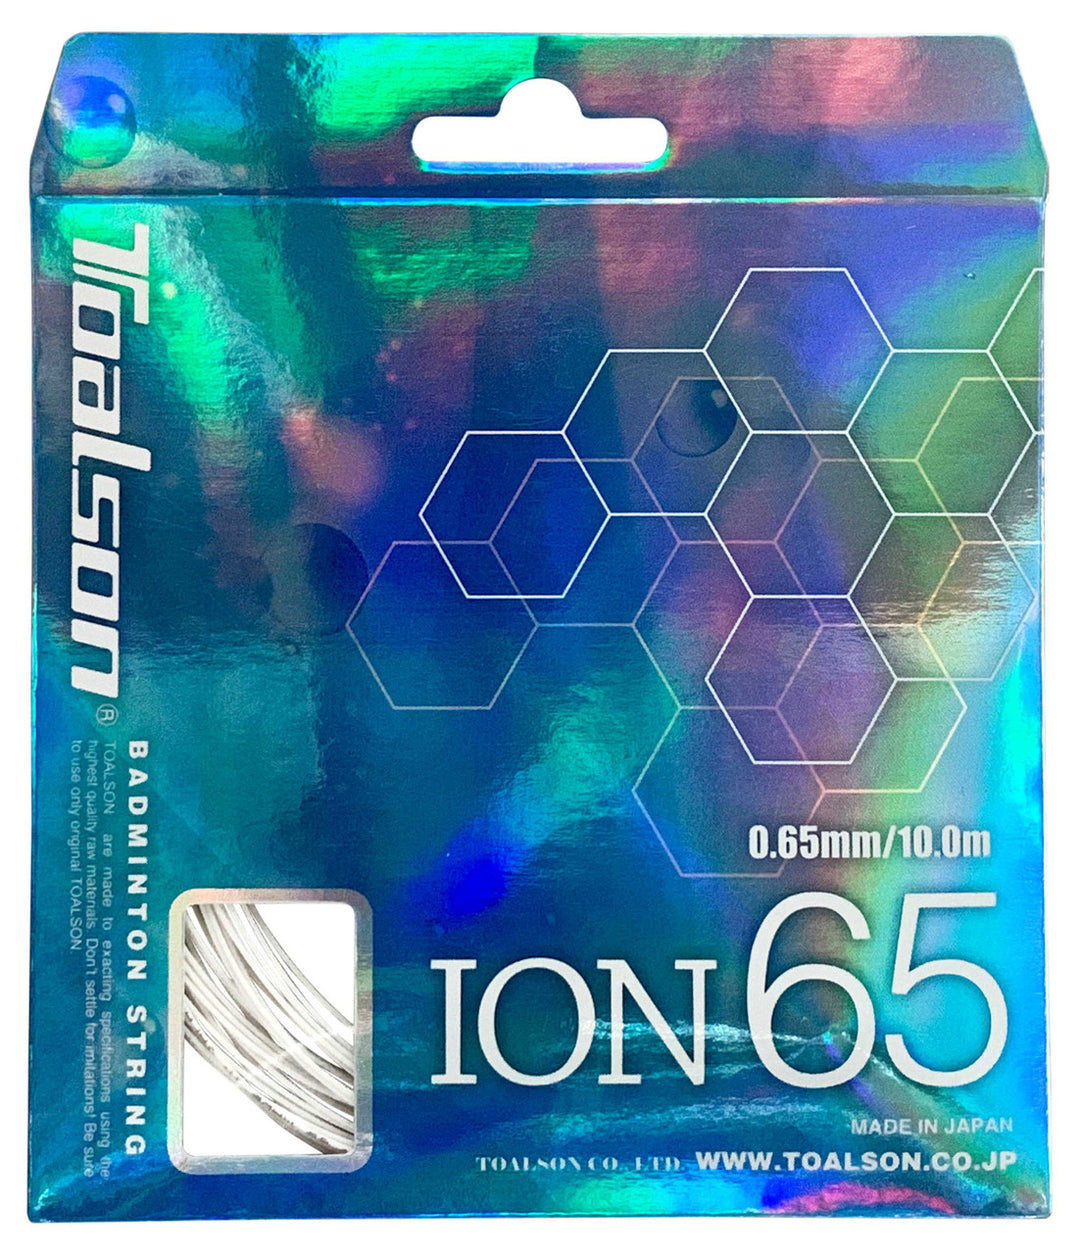 Toalson Ion 65